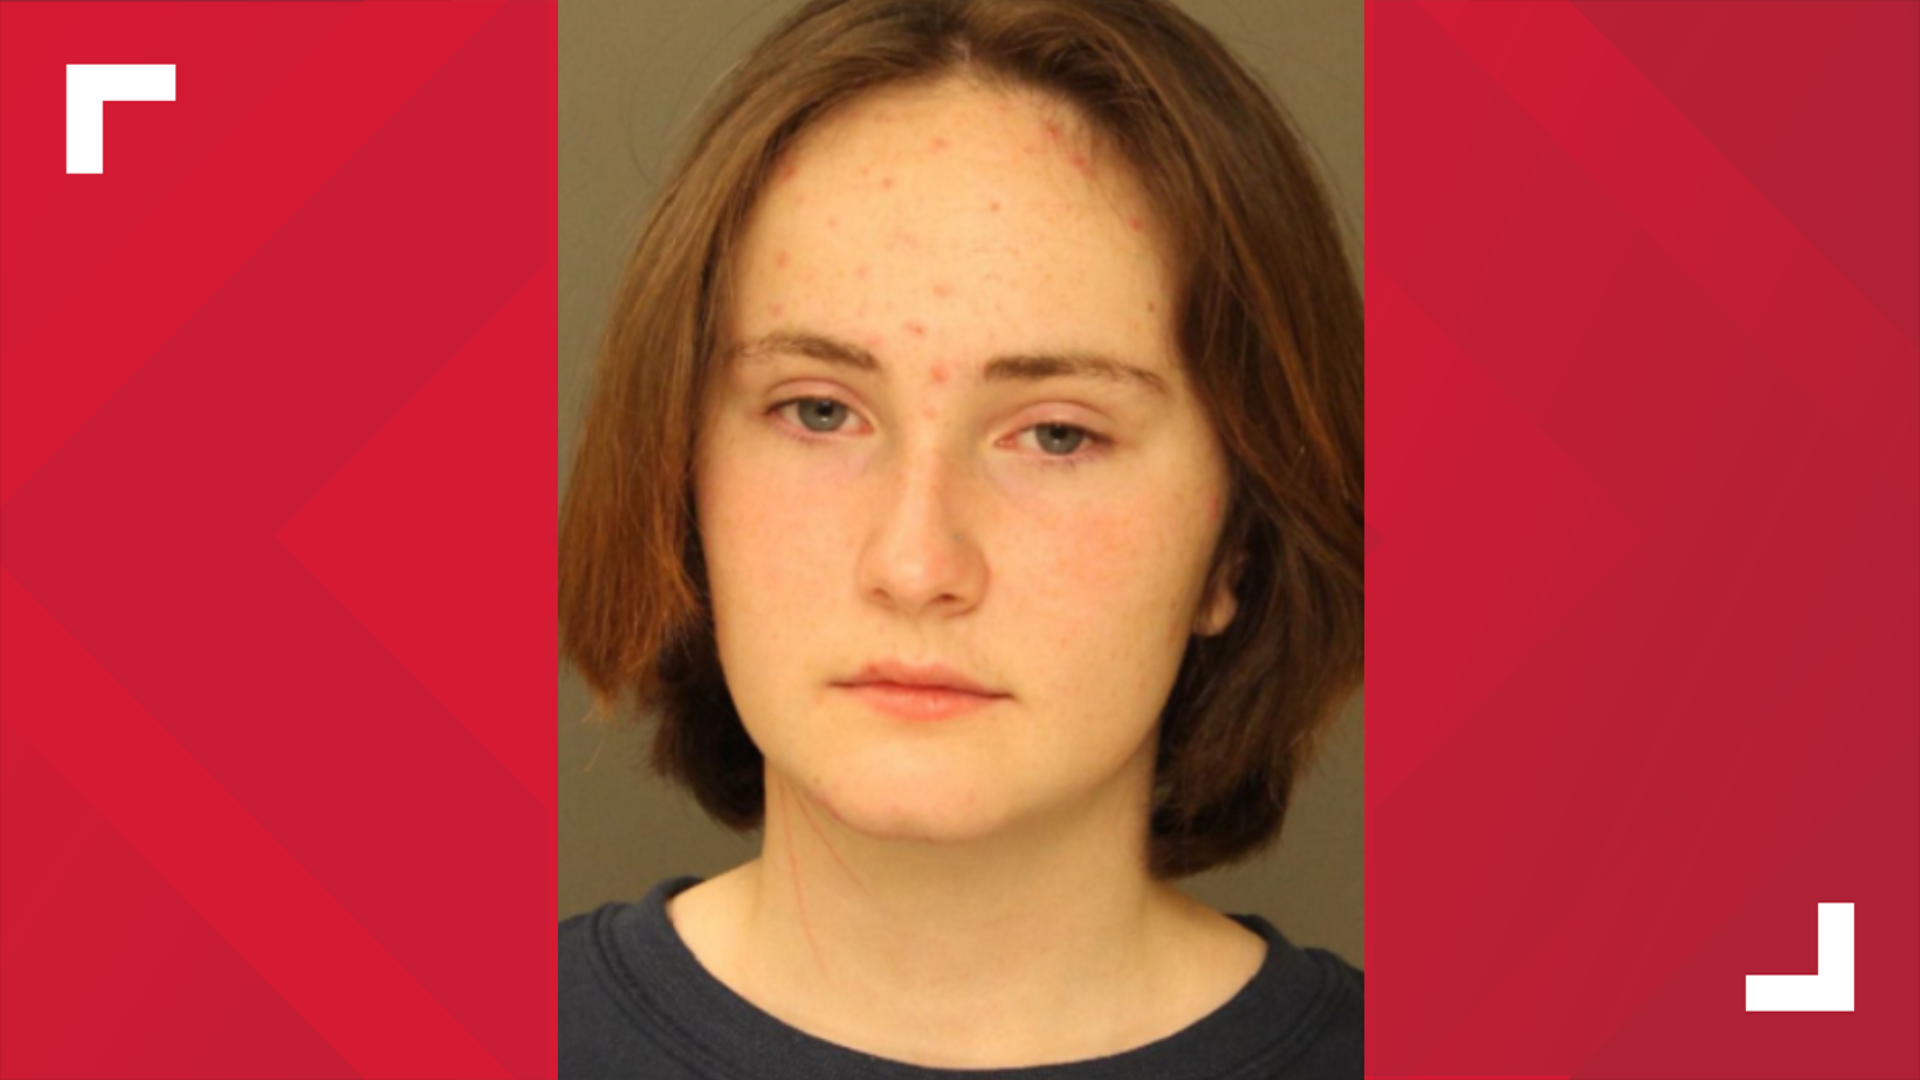 On Monday, the court found that it was not in the public interest to transfer 16-year-old Claire Miller to  juvenile court.